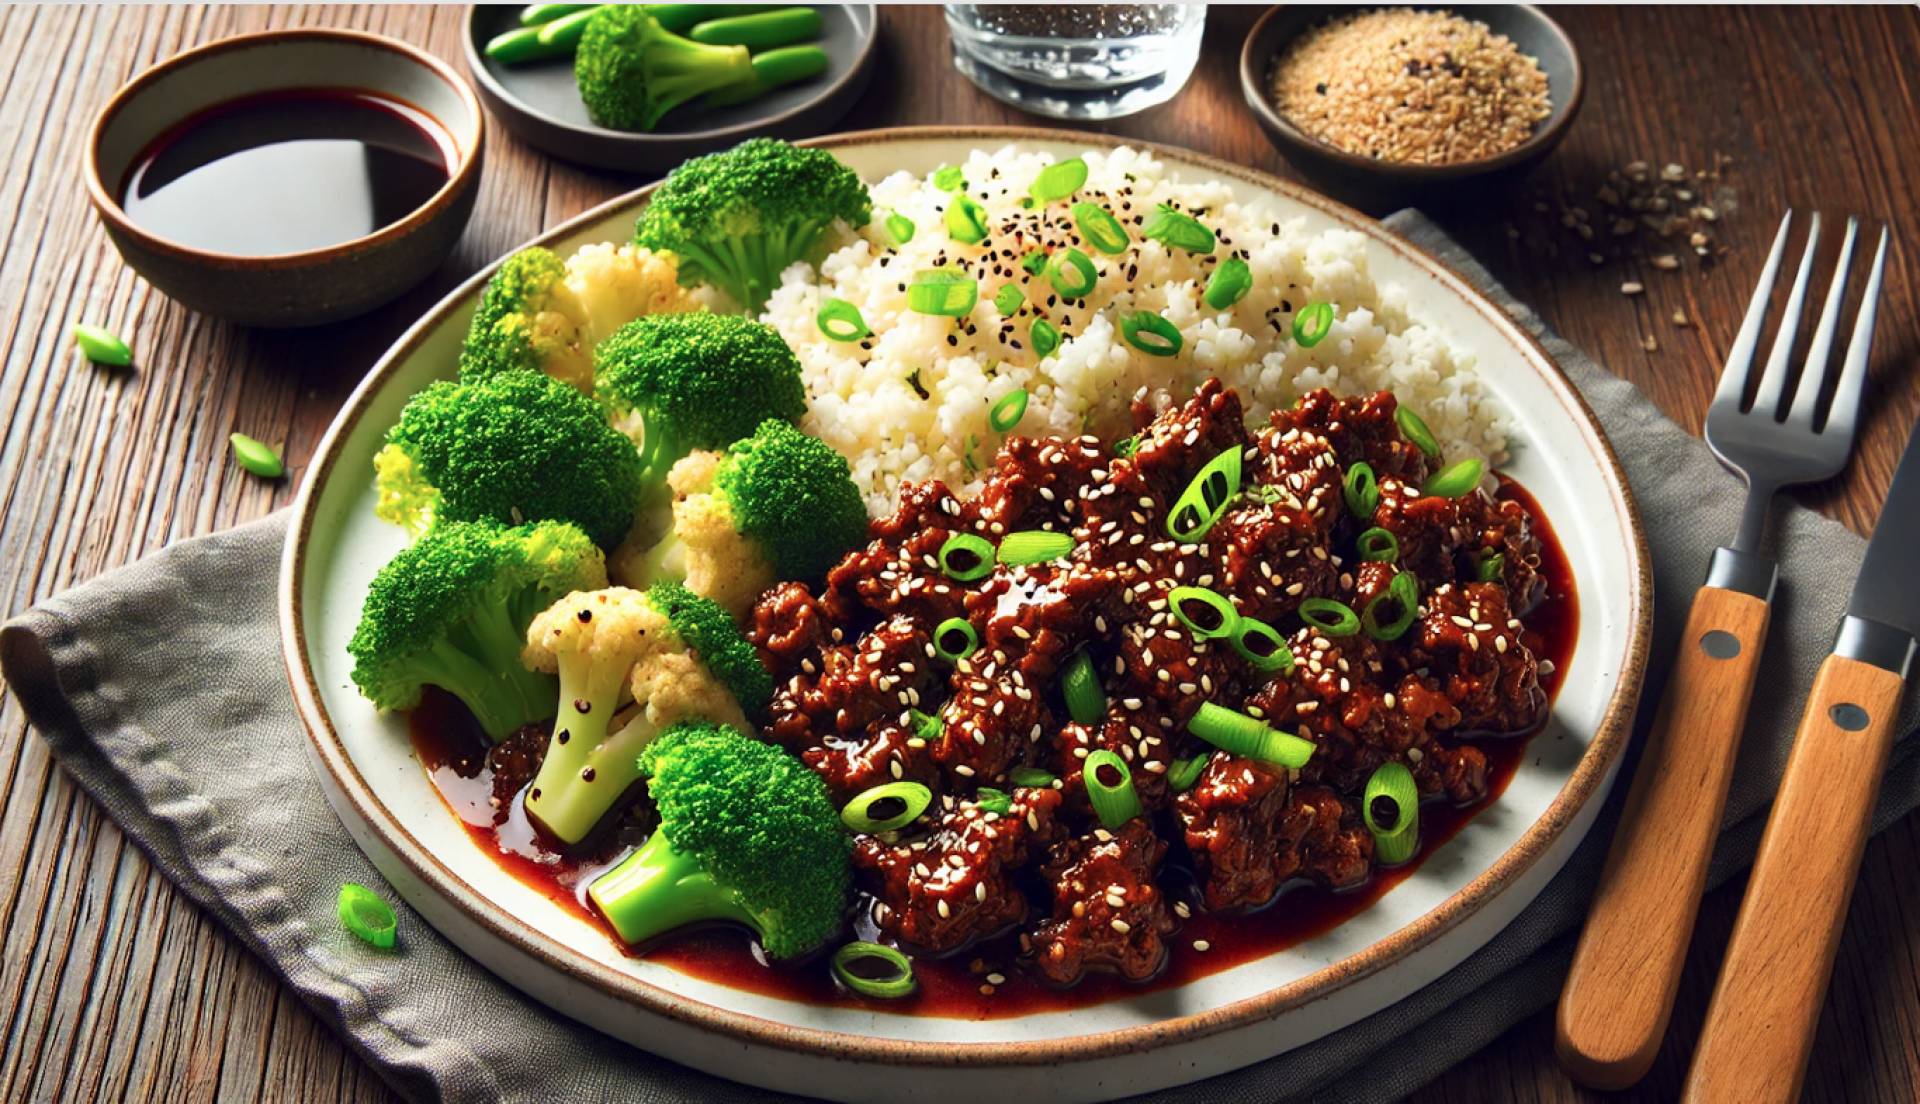 Mongolian Beef (LOW CARB)